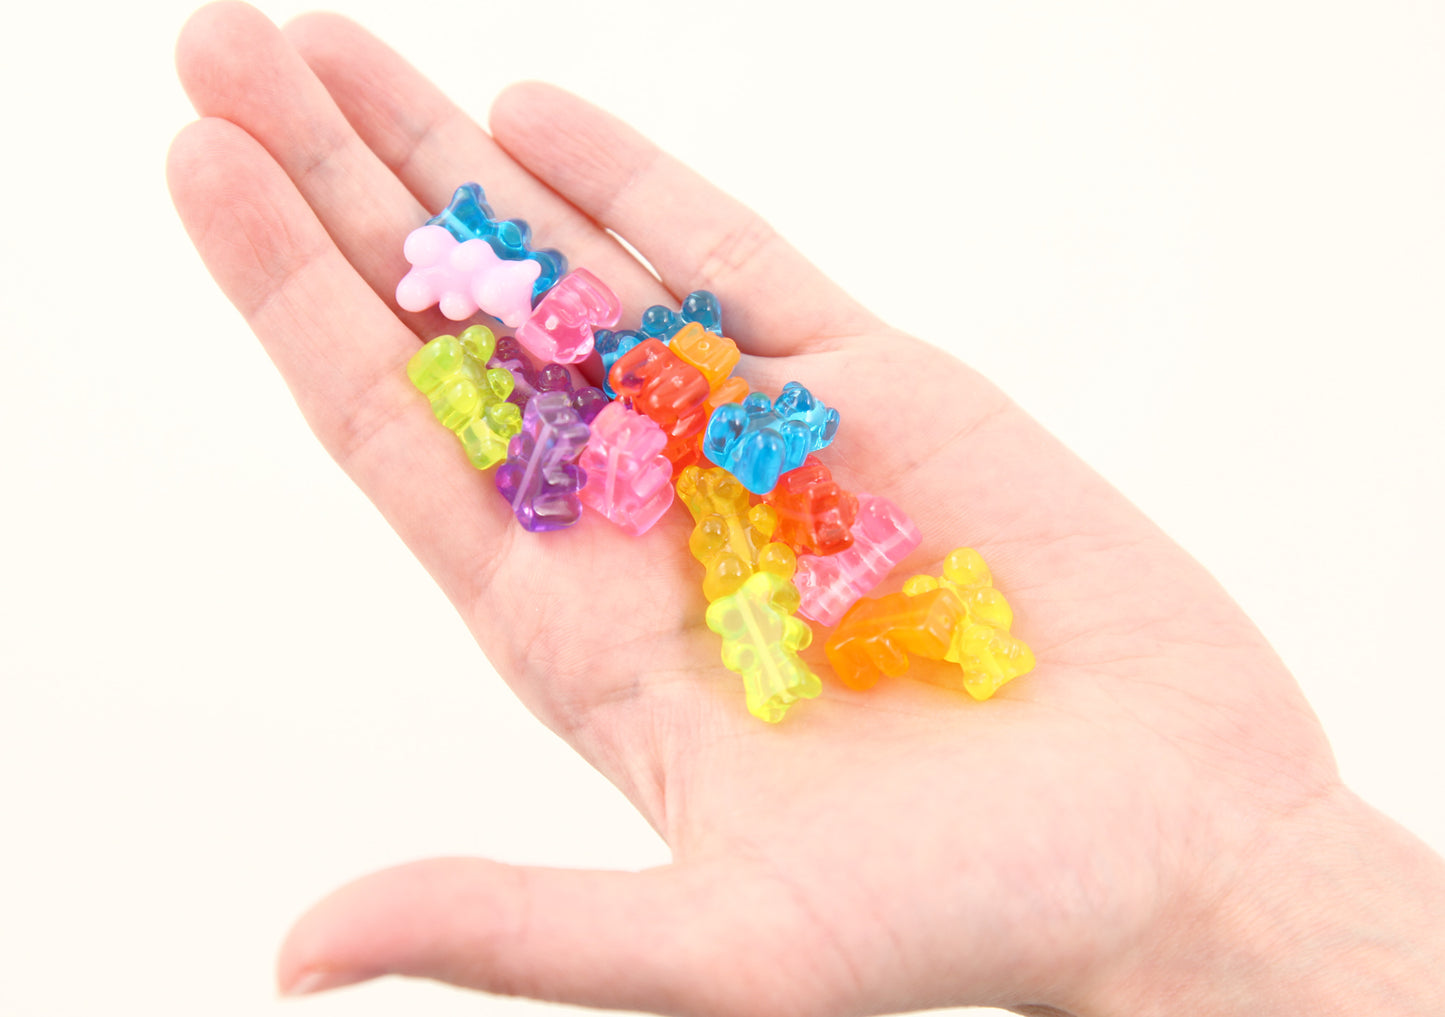 Gummy Bear Beads - 17mm Fake Gummy Bears with Hole for Stringing - Fake Candy Resin Beads - 16 pc set